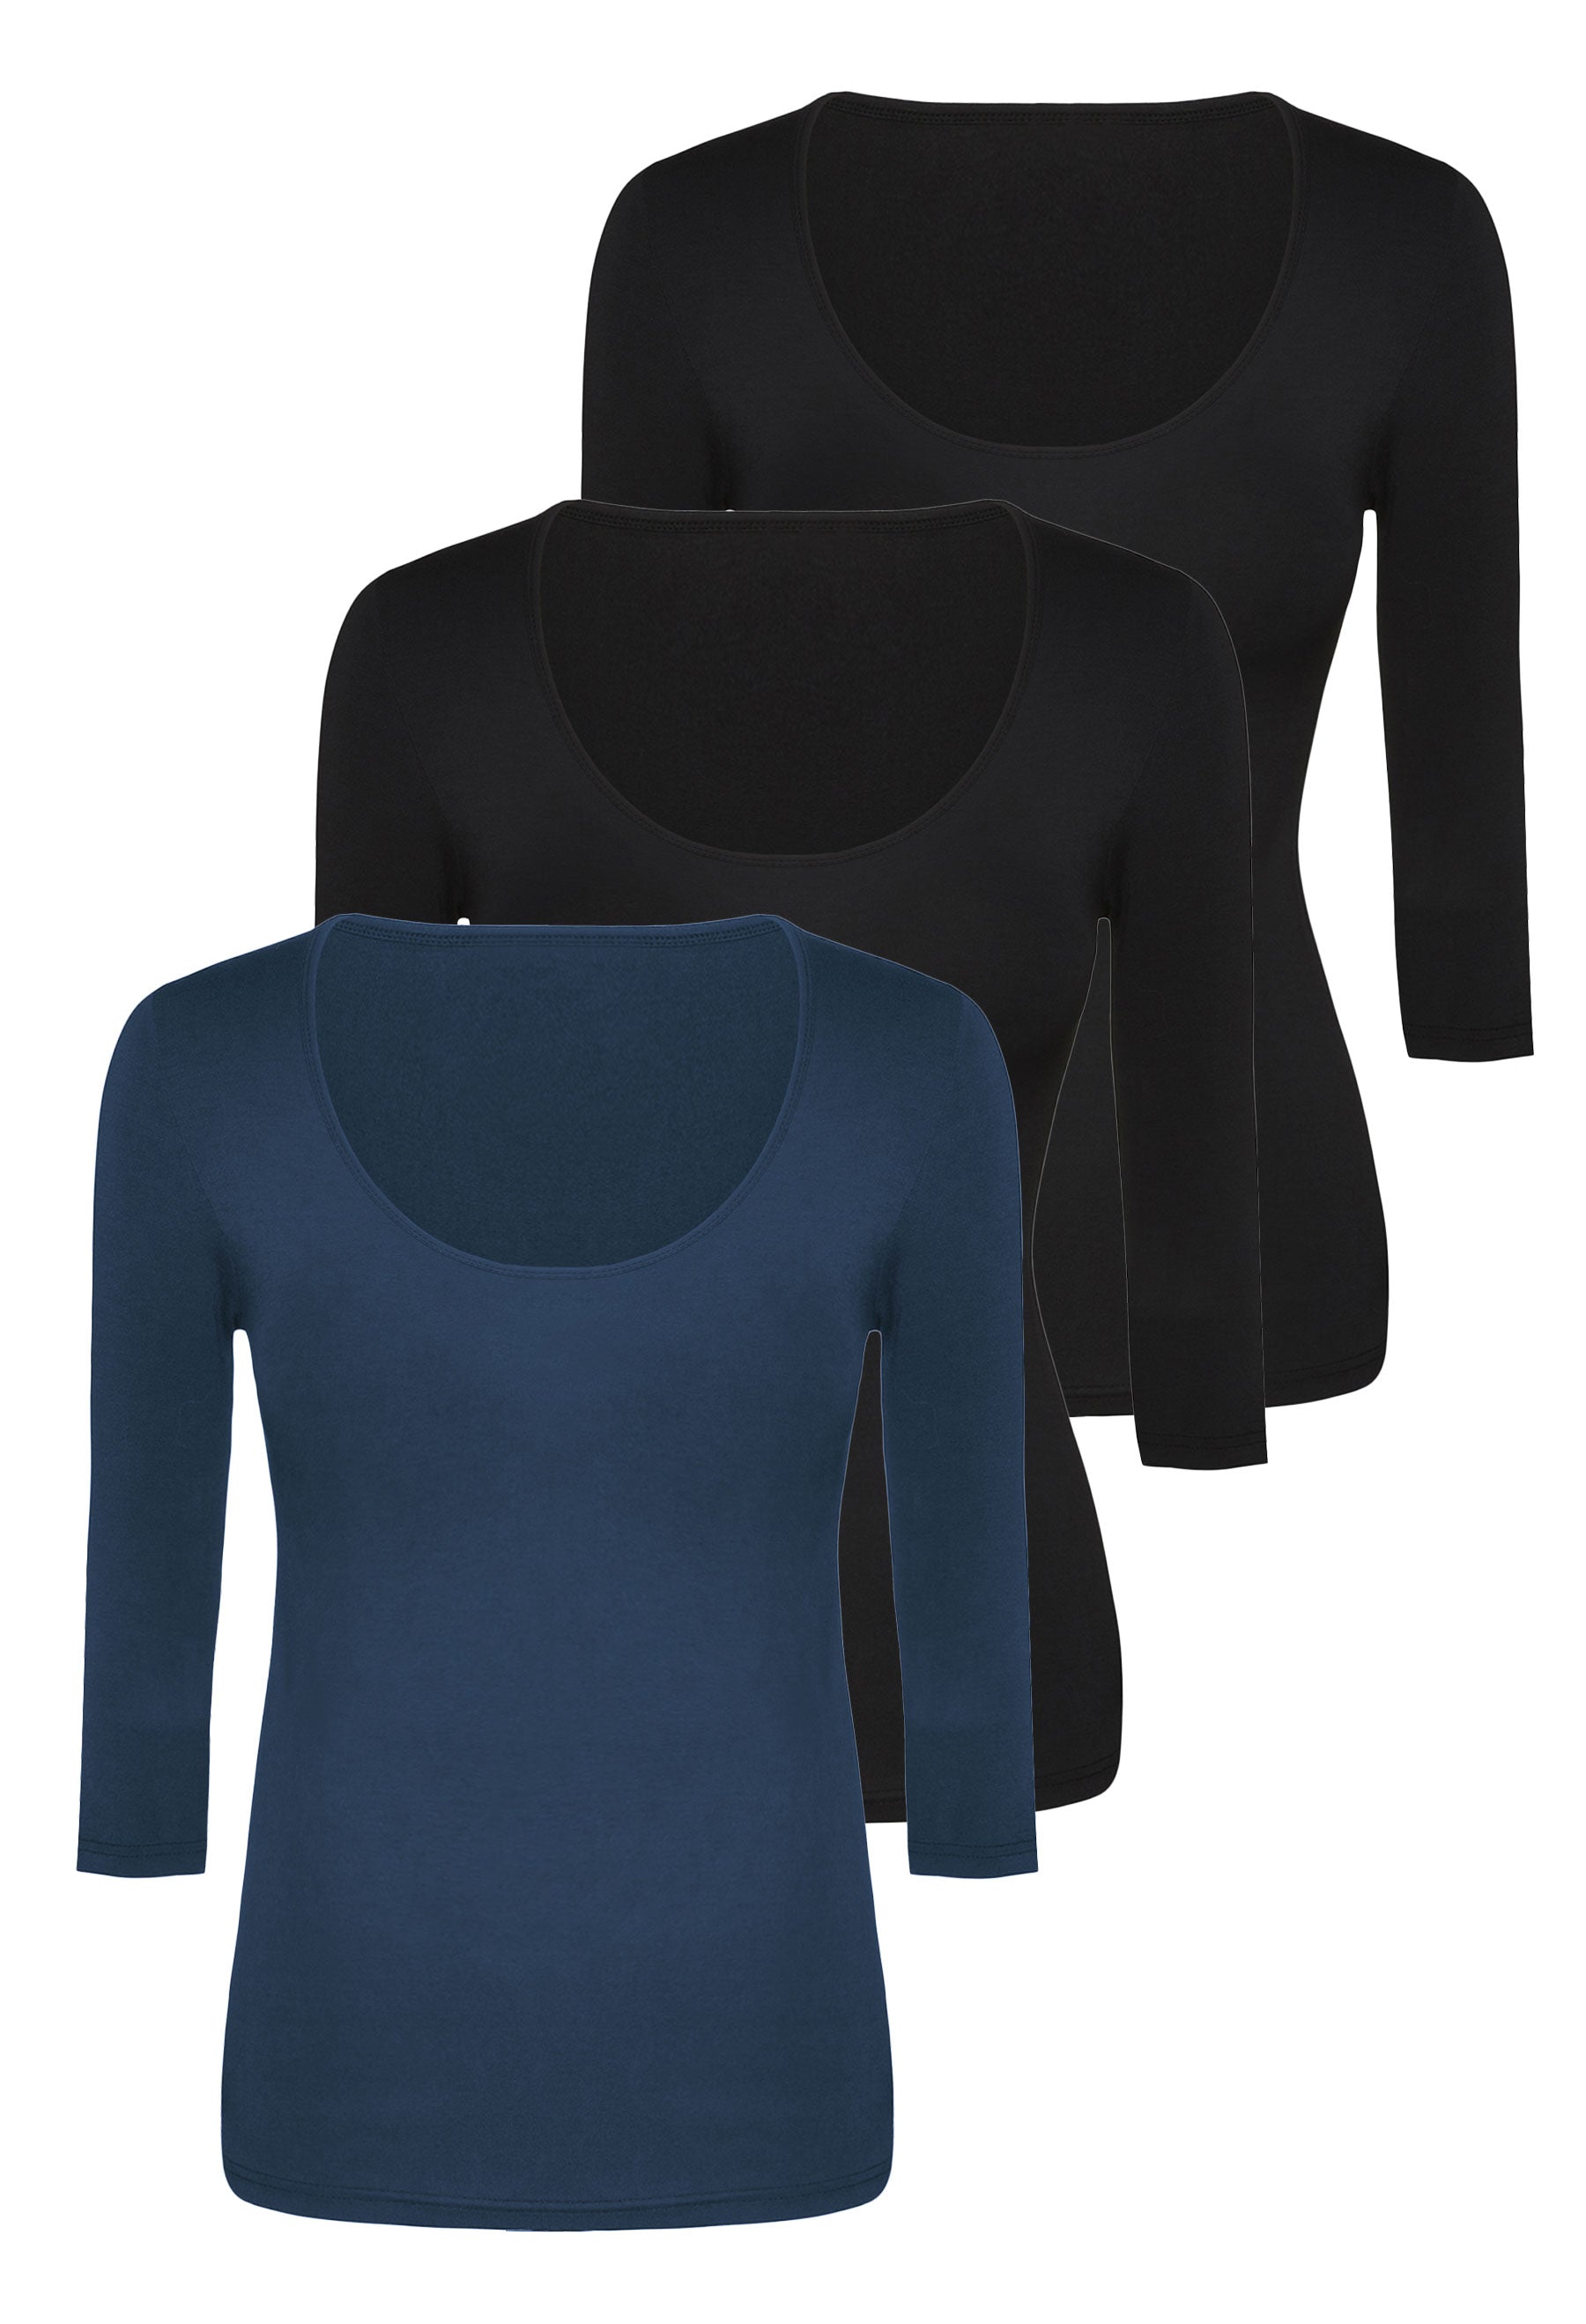 Bamboo 3/4 Sleeve Top  -3 Pack